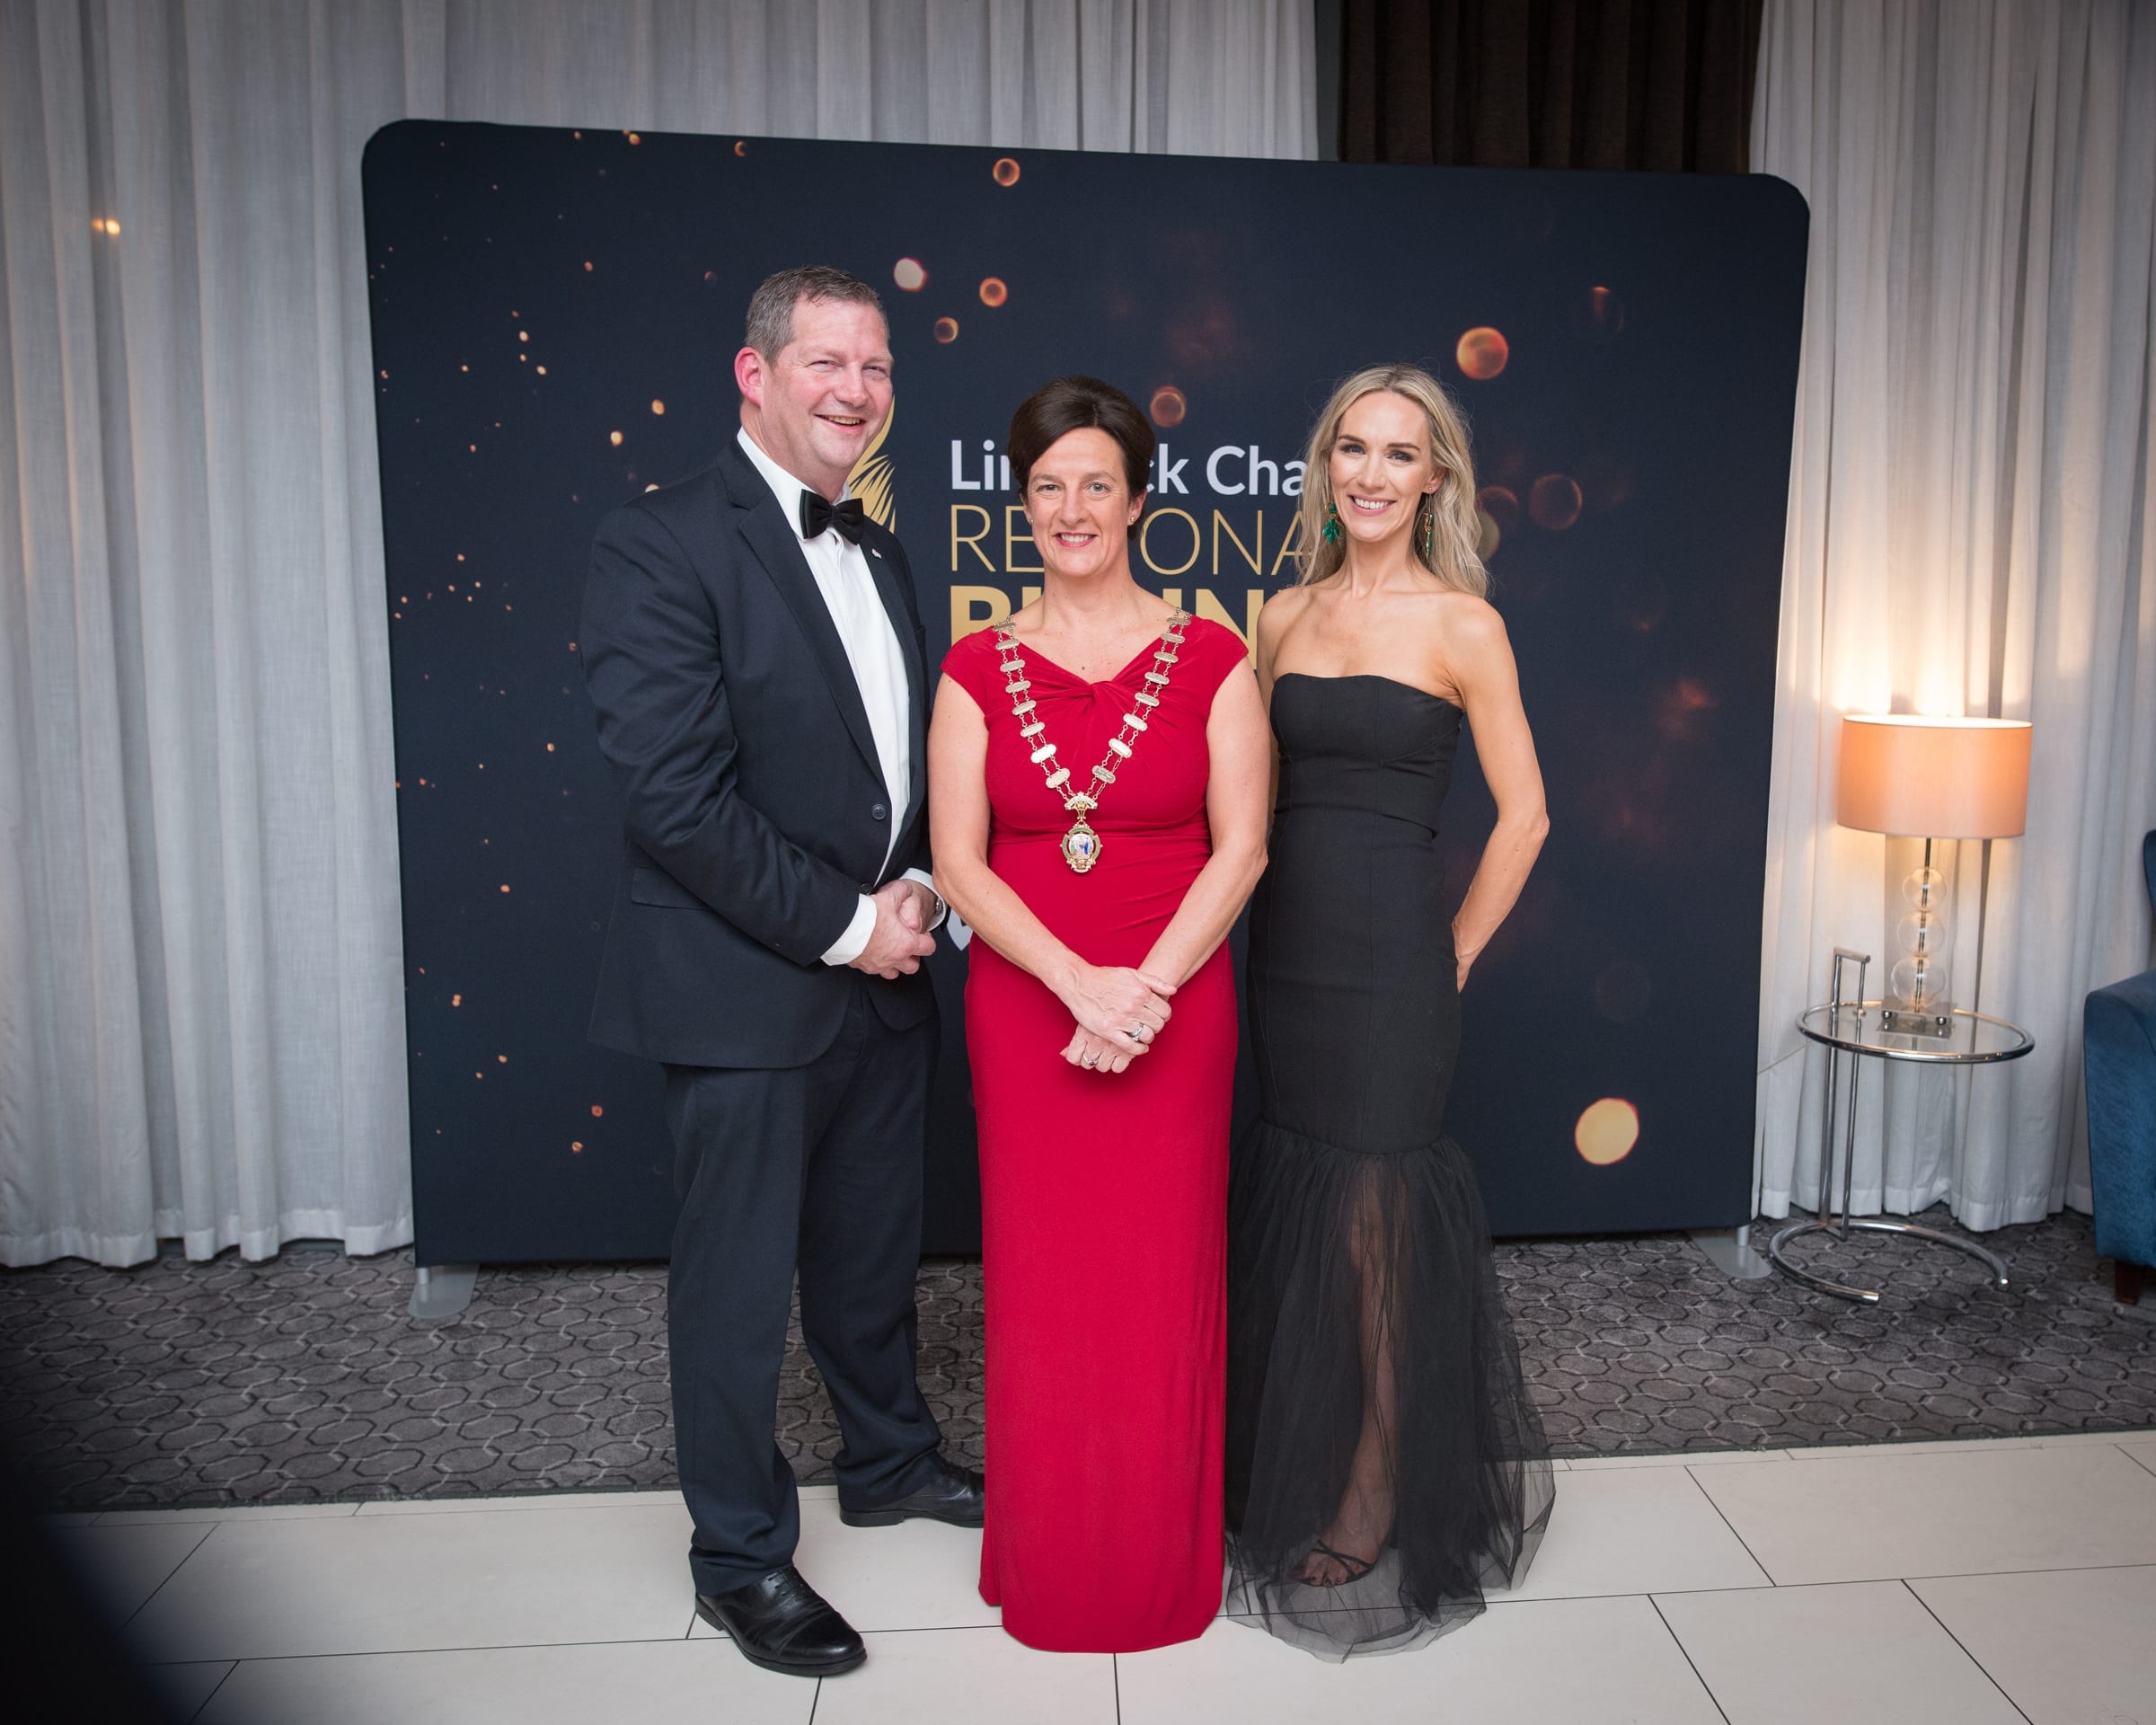 No repro fee- limerick chamber president's dinner- 16-11-2018, From Left to Right:Dr Liam Browne - Vice President LIT, Dr Mary Shire- President Limerick Chamber, Deirdre Ryan - CEO Limerick Chamber. 
Photo credit Shauna Kennedy